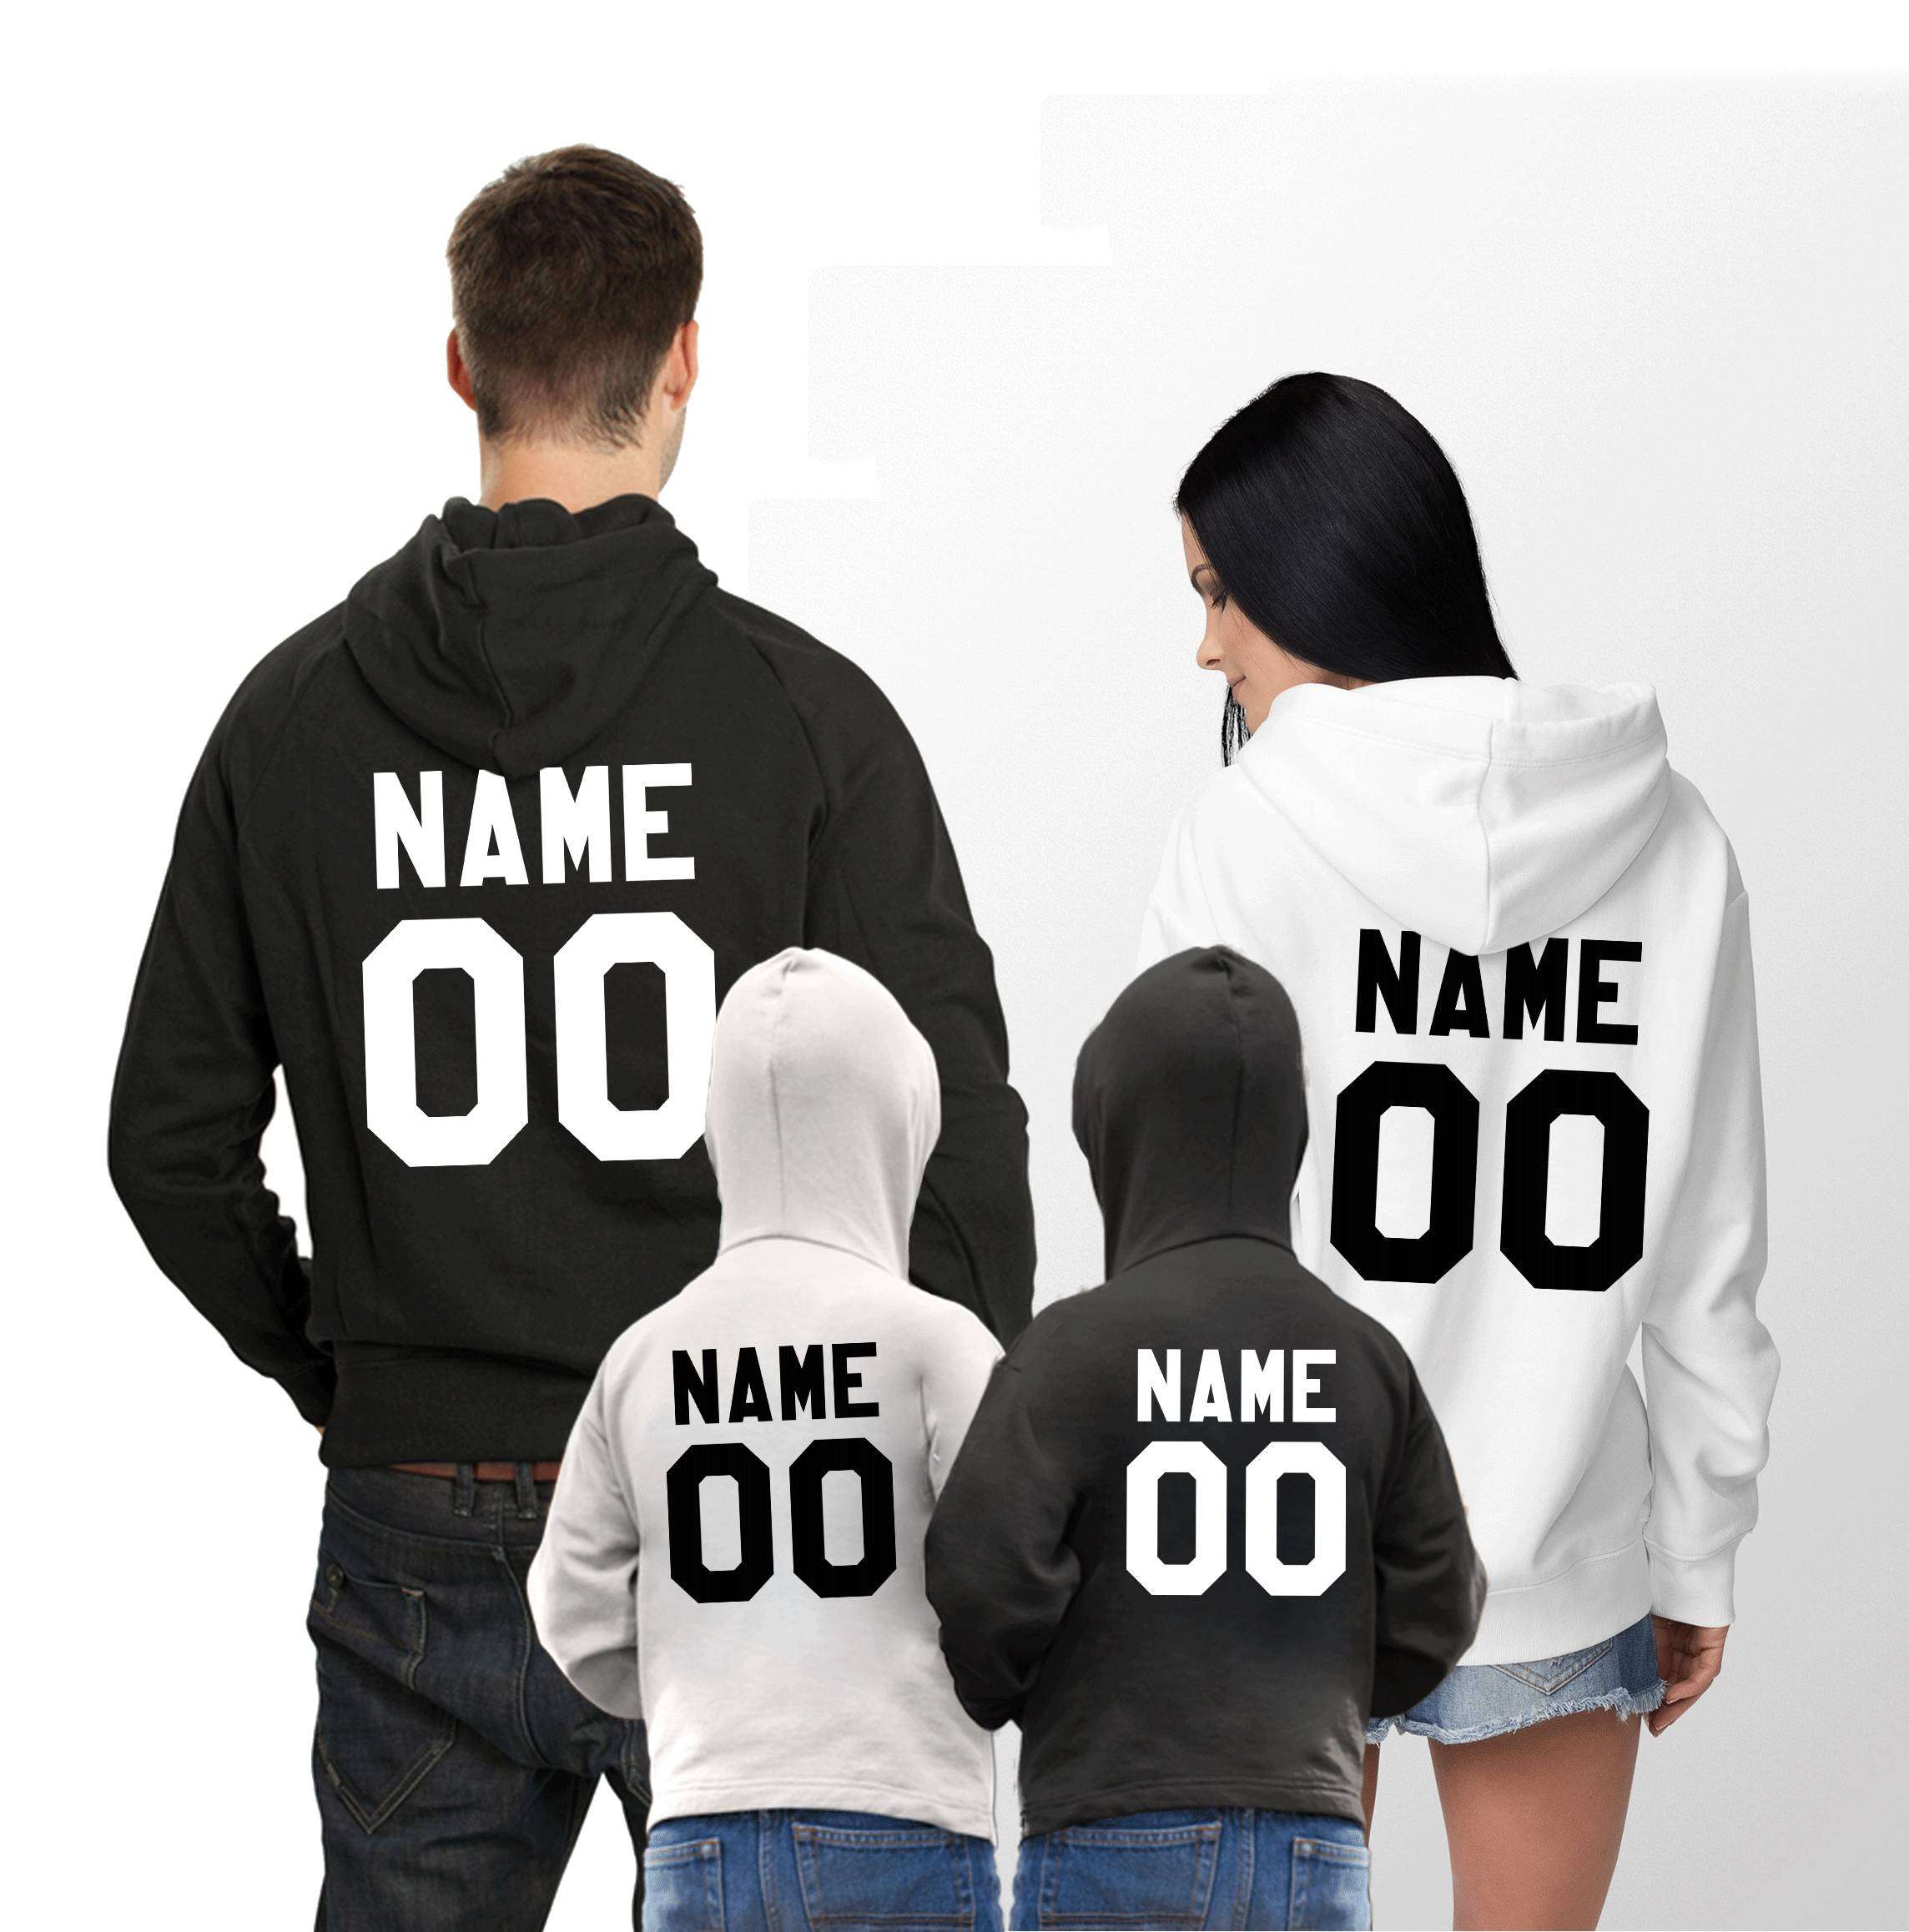 Personalized Matching Family Hoodies - Awesome Matching Shirts for ...